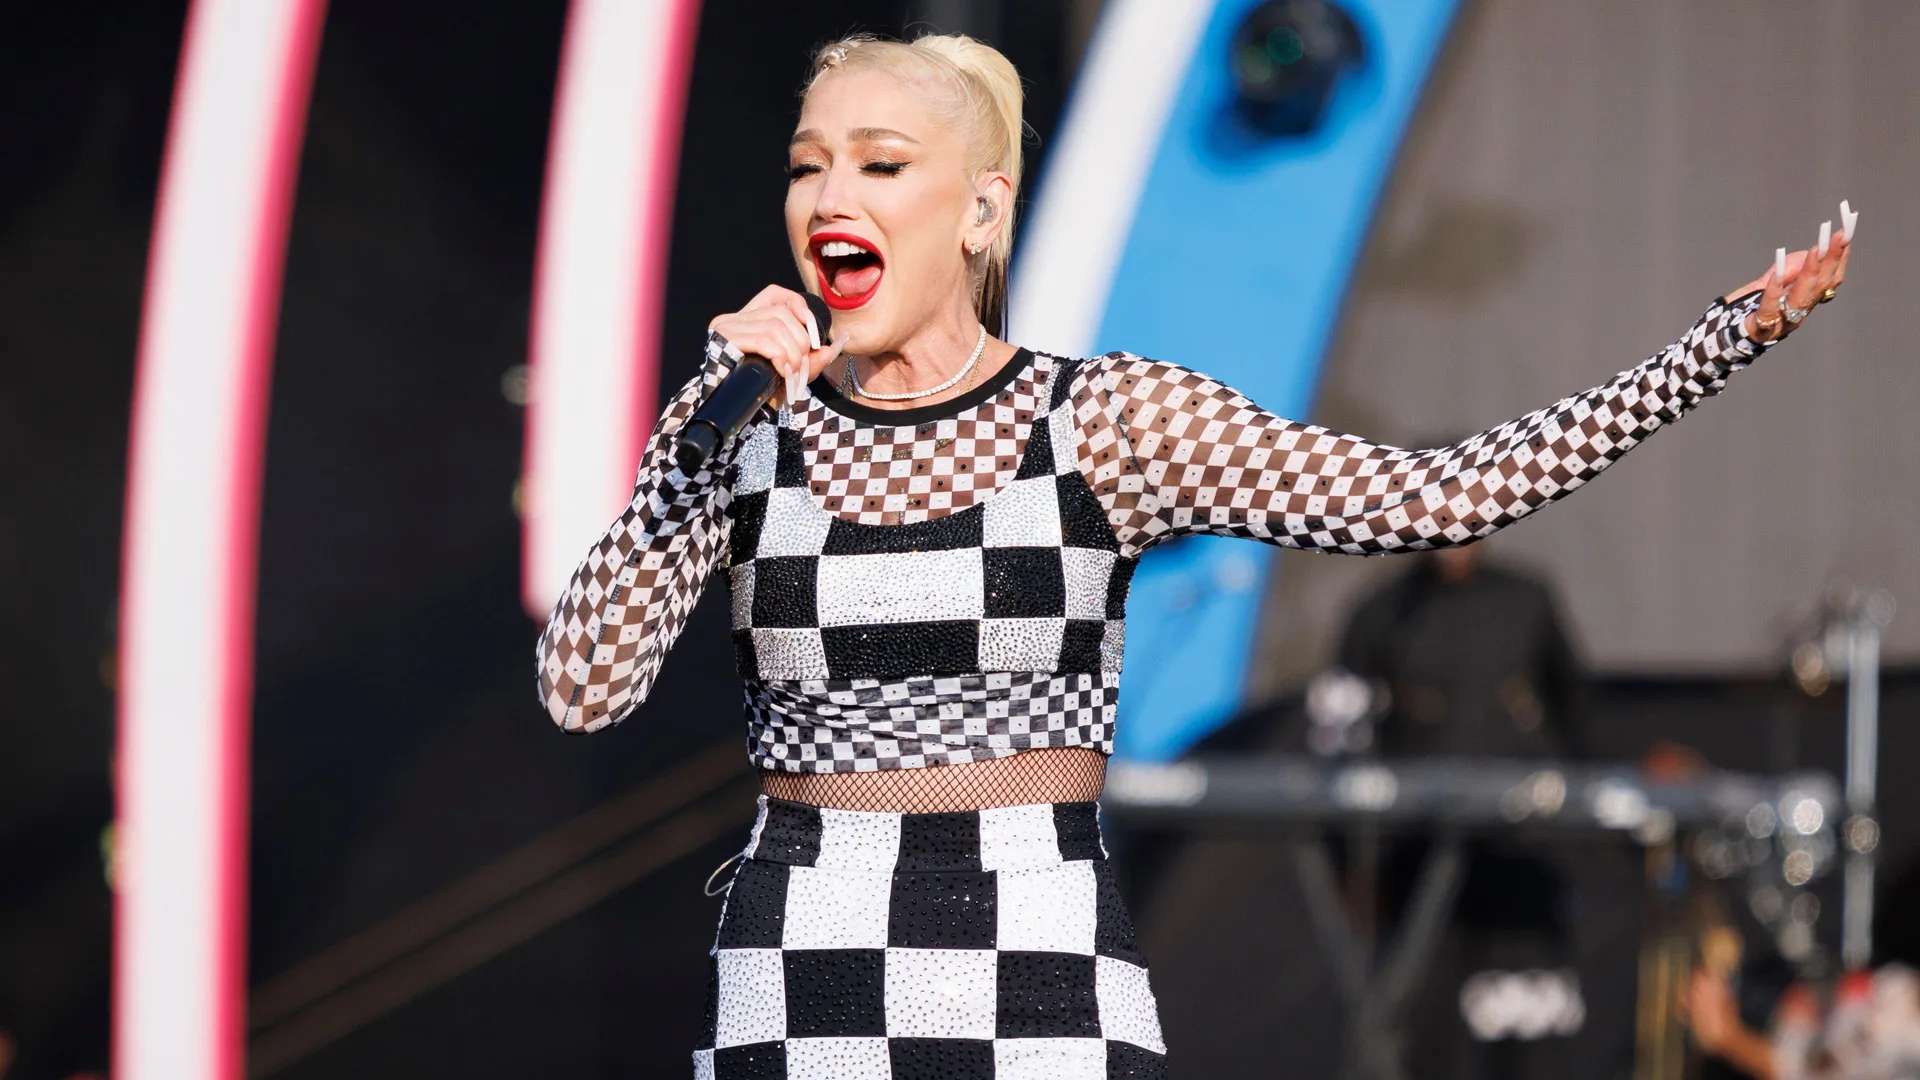 A photograph of Gwen Stefani singing on stage in a black and white outfit against a blue and red lit background